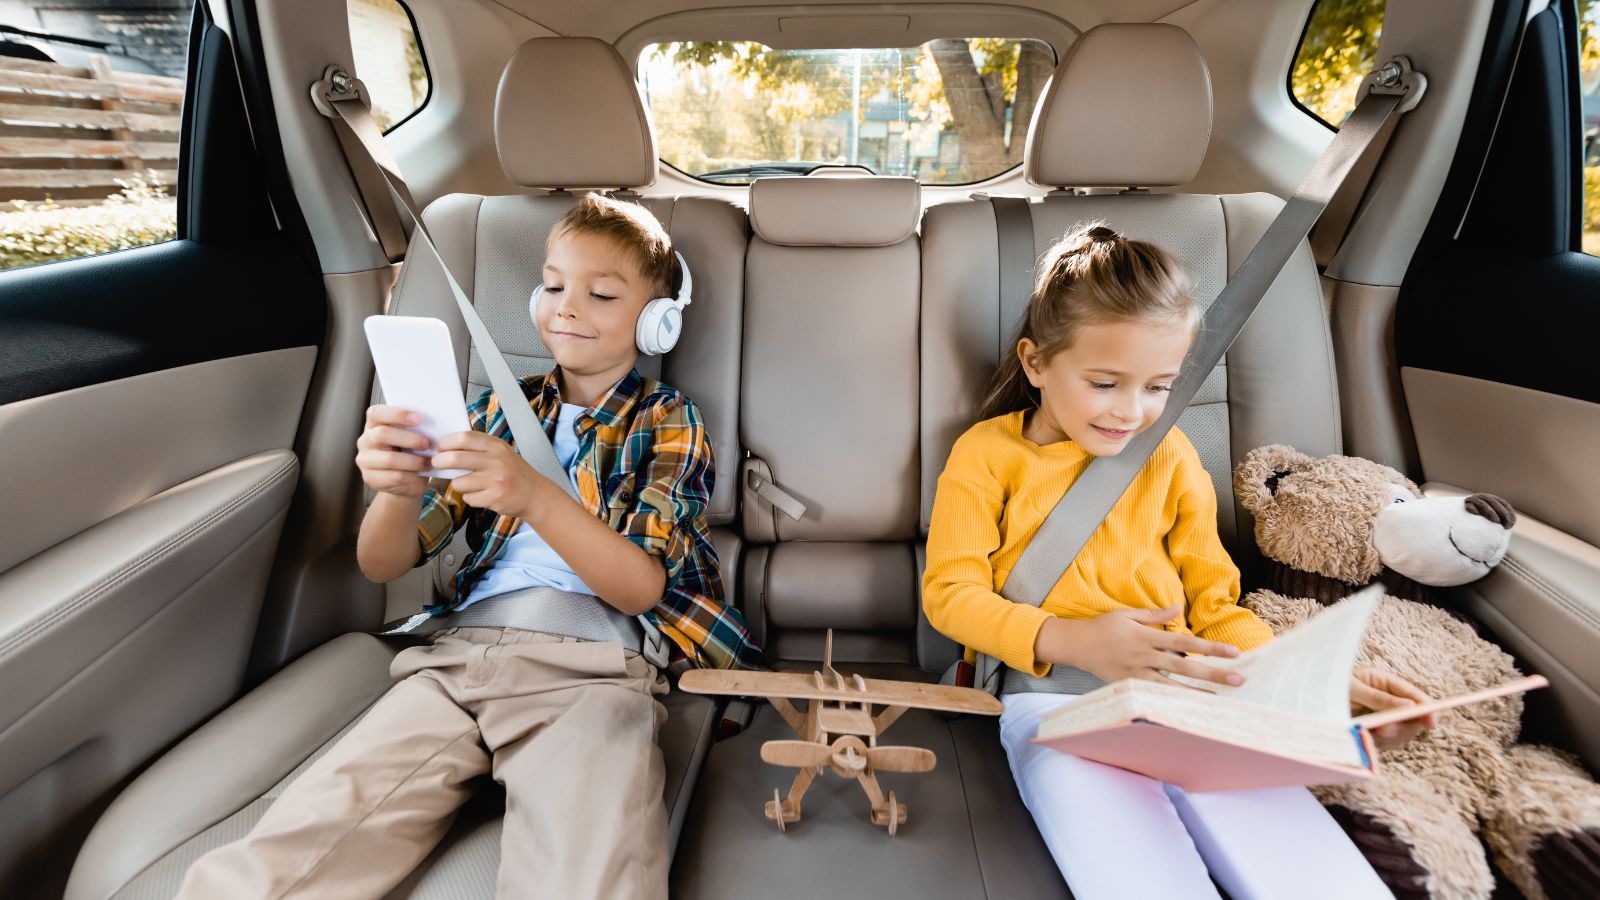 <p>Family road trips are great for spending vacation days with your children and providing your kids with memories that last a lifetime. However, traveling with kids isn’t always easy!</p> <p>Keeping your kids occupied can be a challenge, particularly on long stretches of road. Luckily, Reddit’s here to help! In a recent post, Redditors gave their suggestions for the best road trip hacks for kids. </p> <p>Today, we look at the 13 most popular ways to avoid hearing “I’m bored” or the sounds of fighting from the back seat:</p>